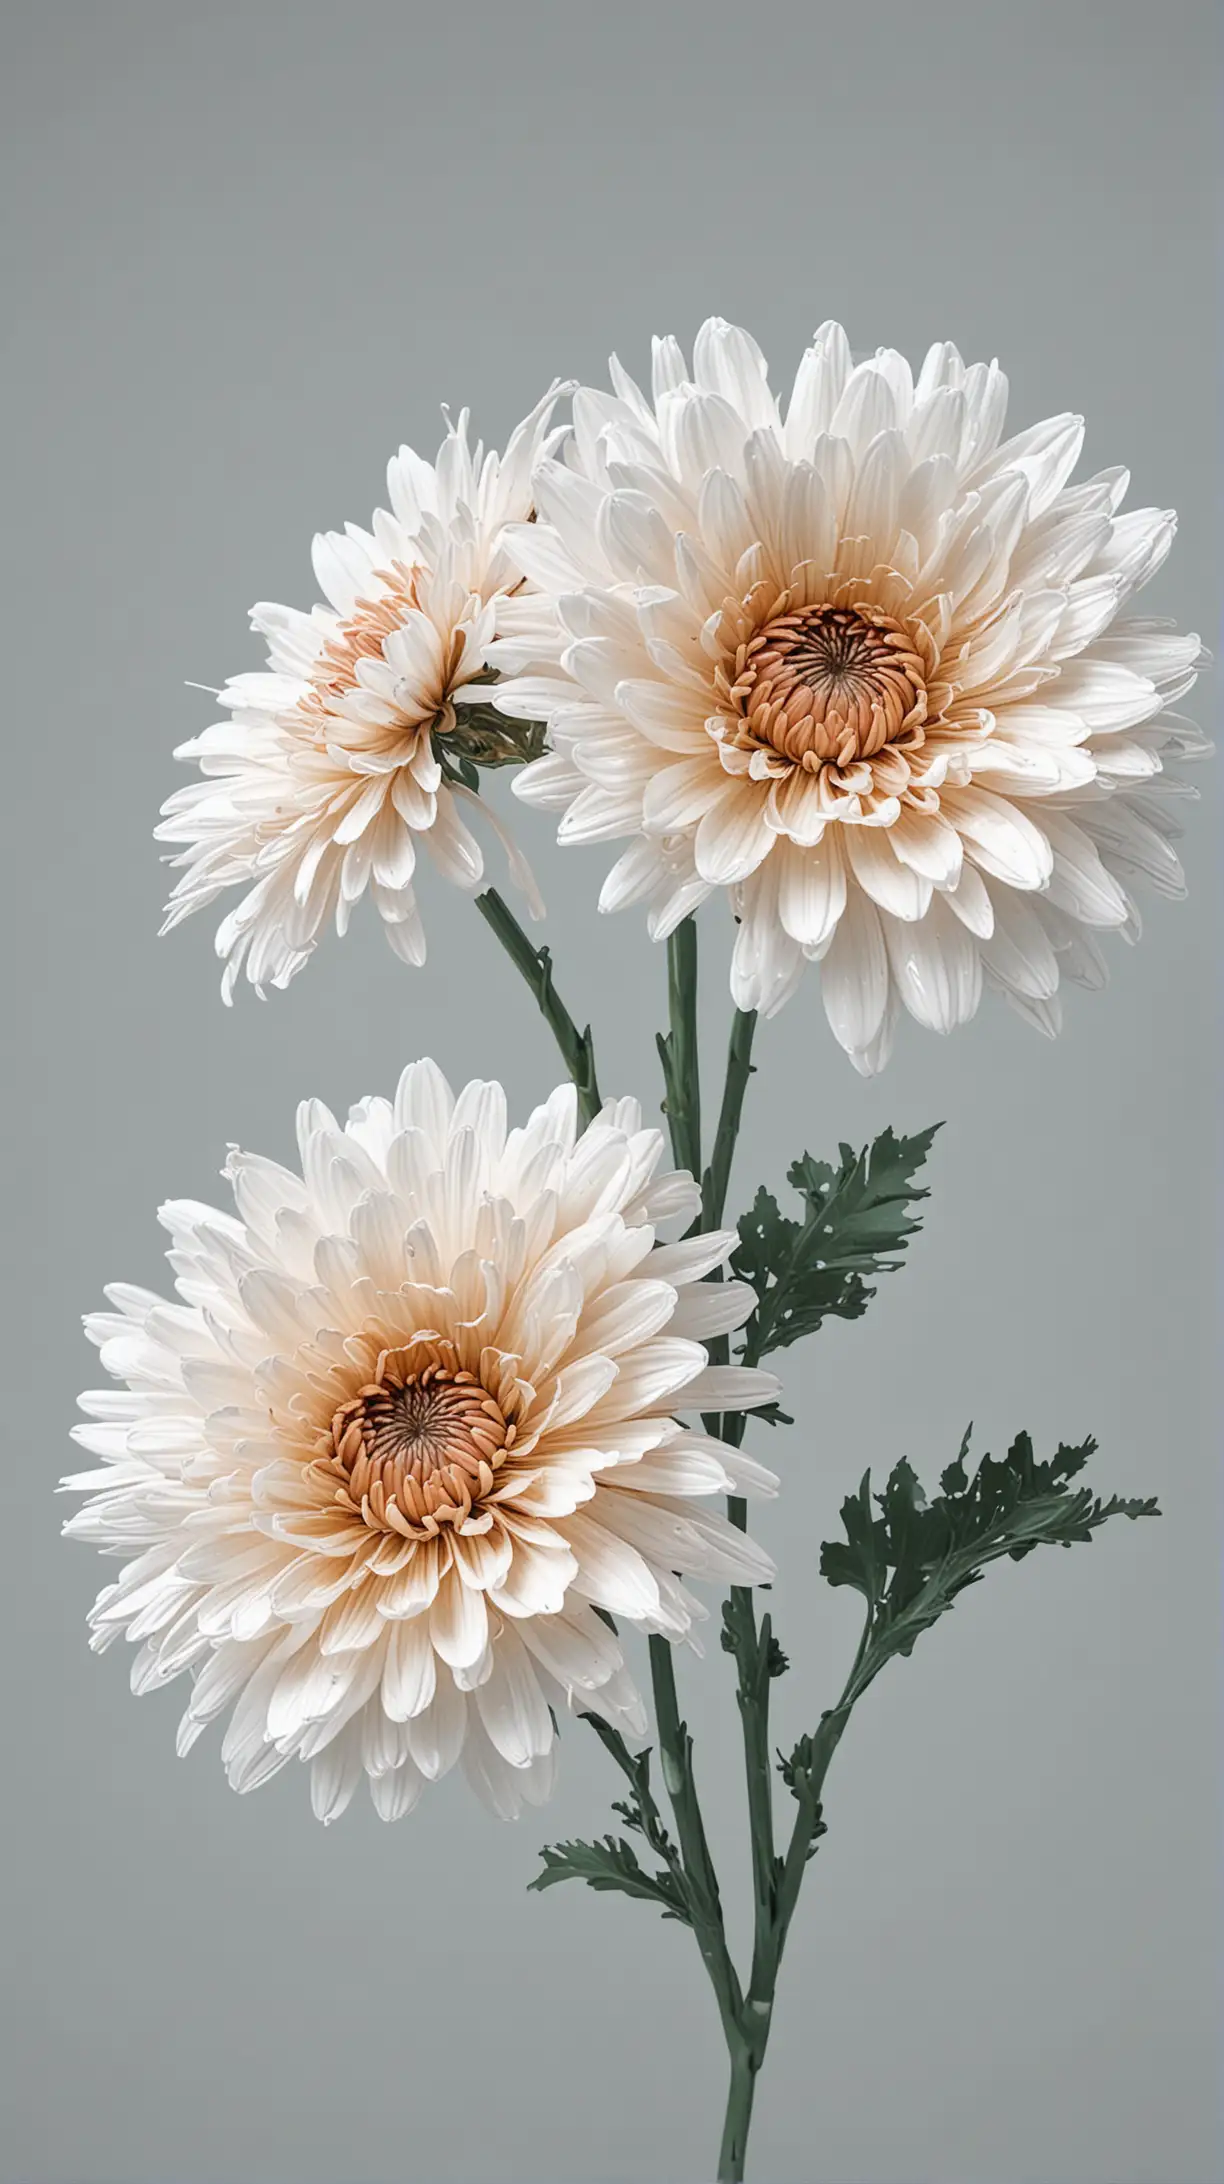 Abstract Glitched Chrysanthemum Flowers on White Background